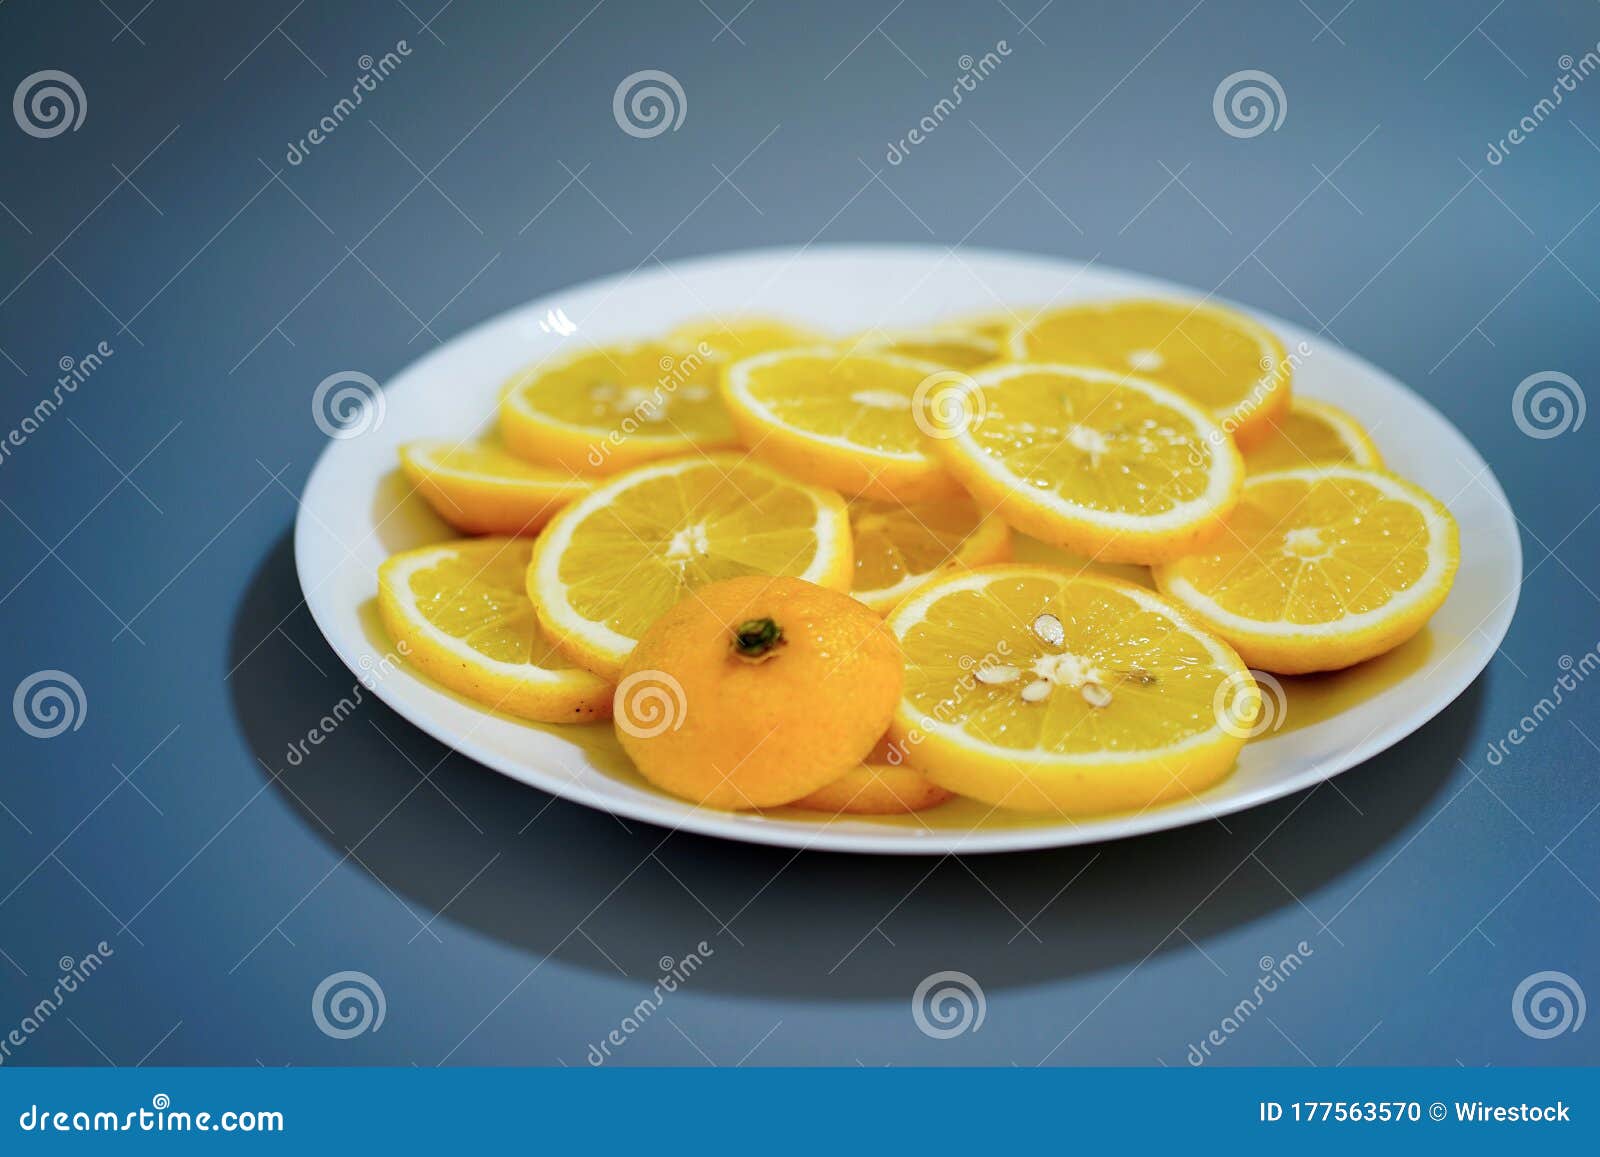 yellow lemons on a plate on a sunny day